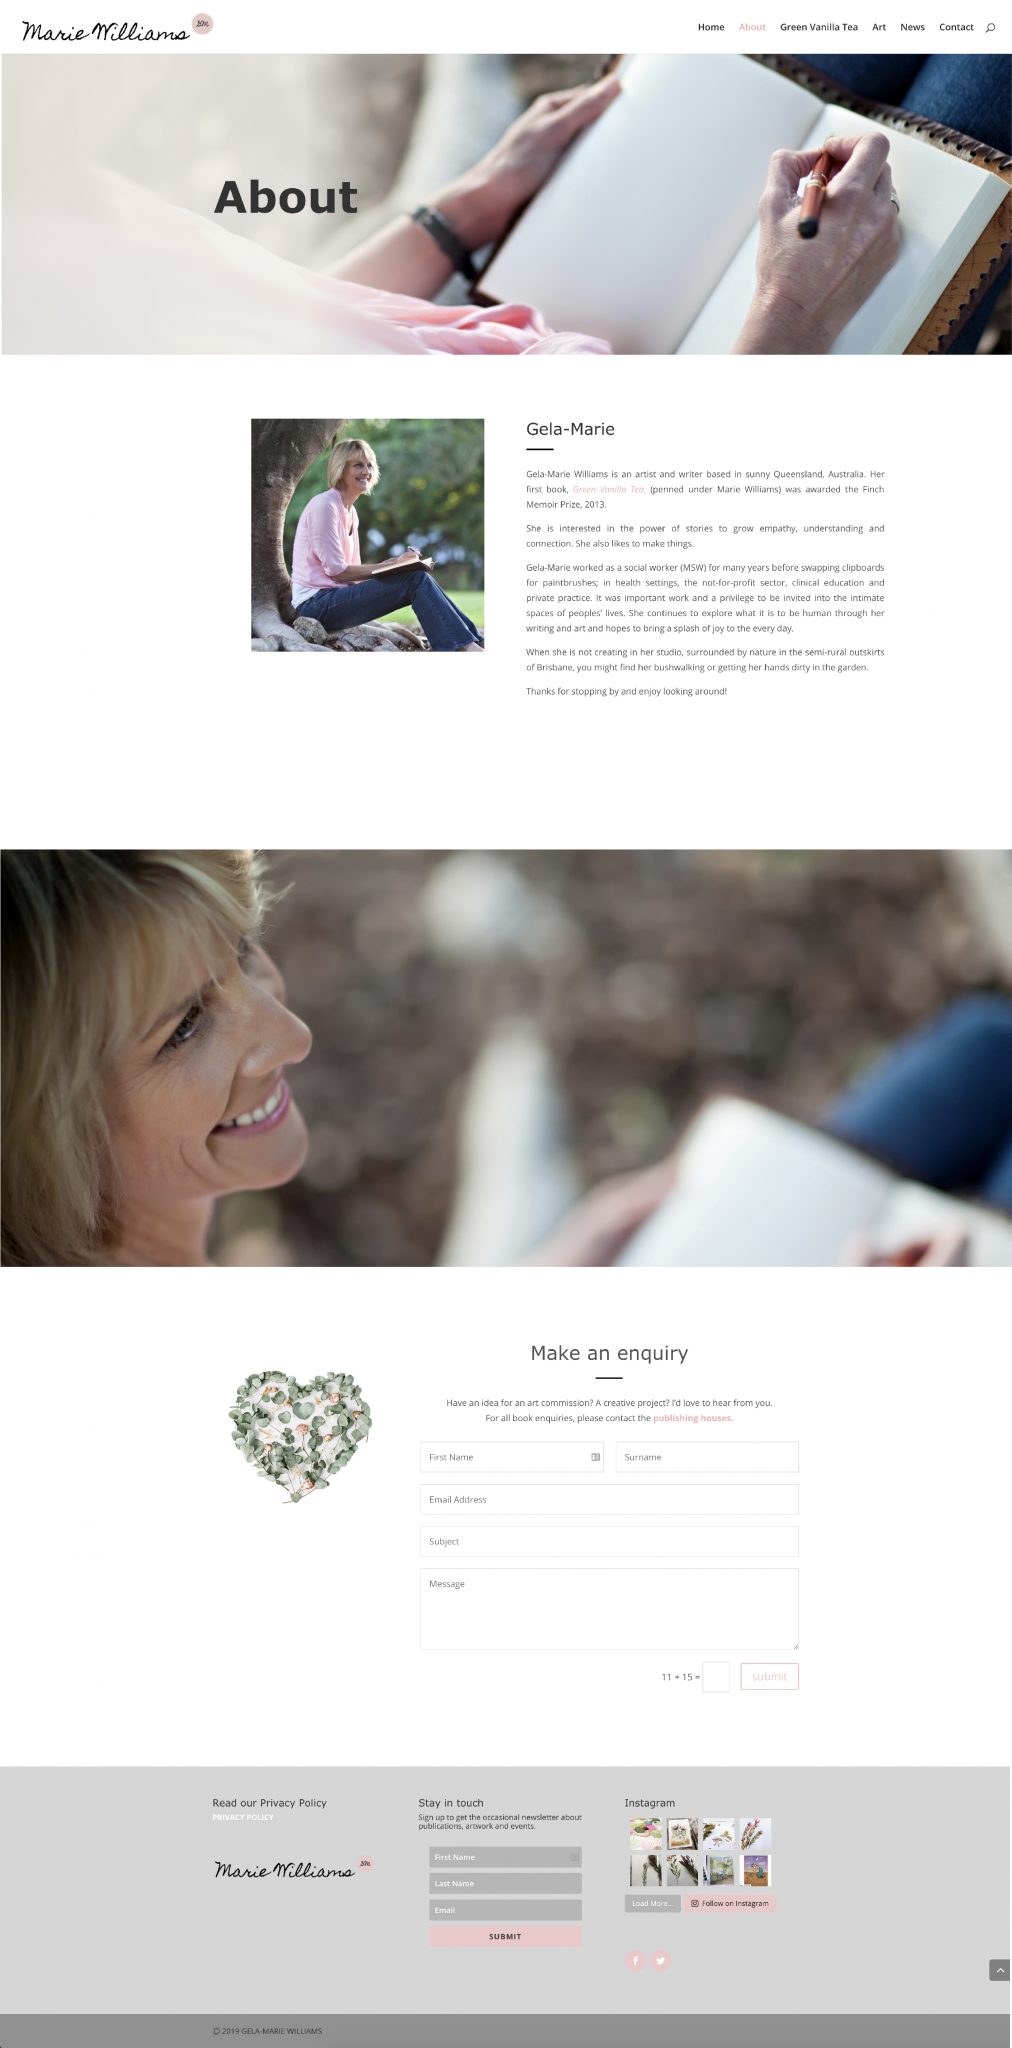 Website Design of Greenstone Holistic Health About page